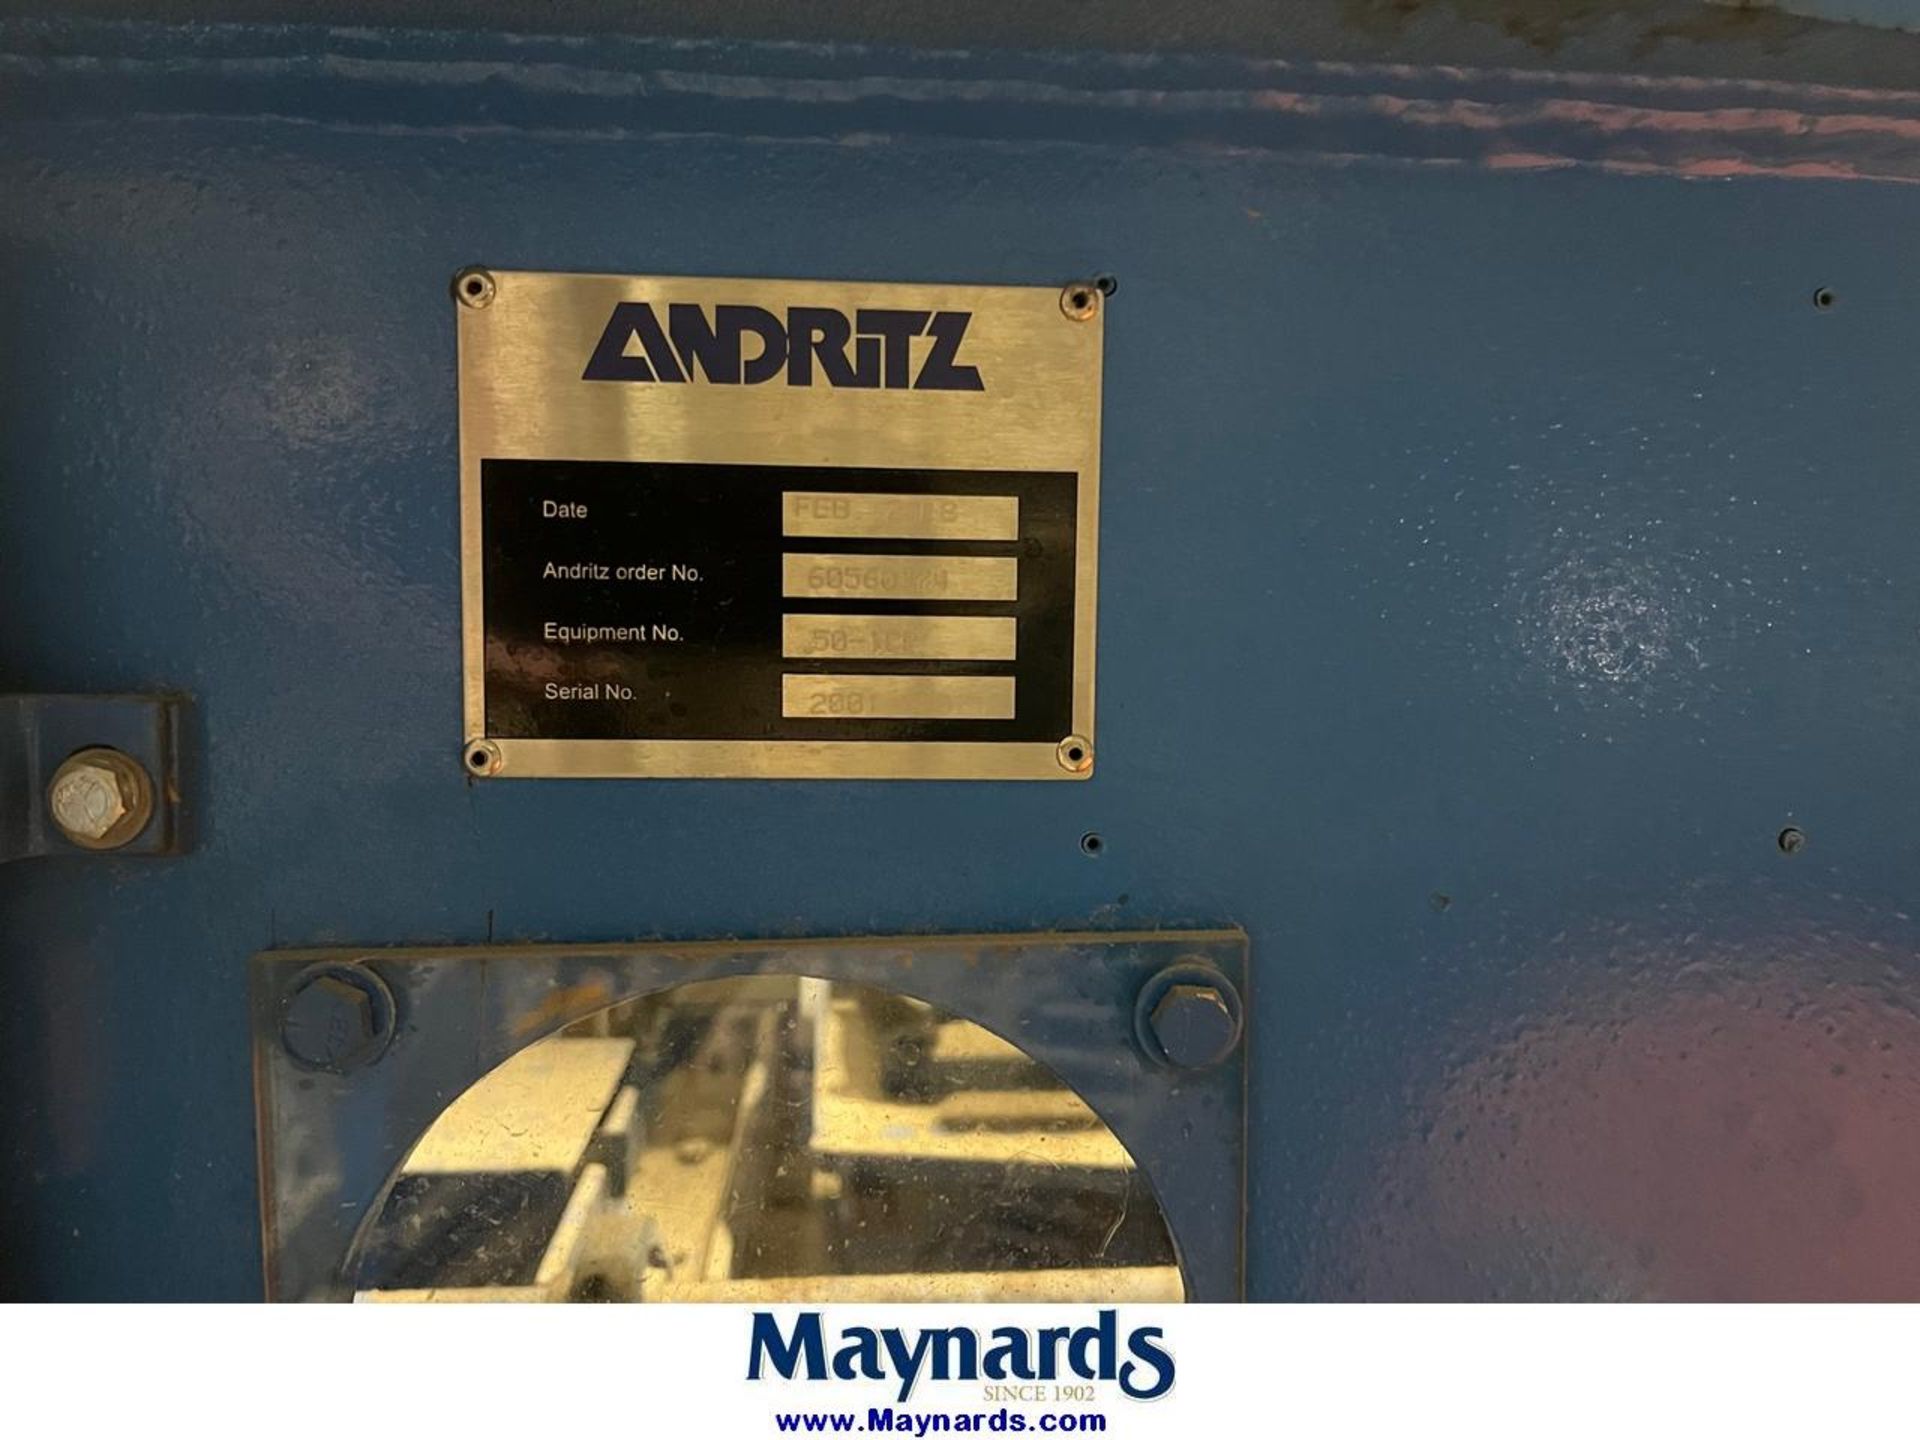 ANDRITZ REFINER MODEL 50-1CP PRESSURIZED MANUFACTURED 2018 - Image 5 of 6